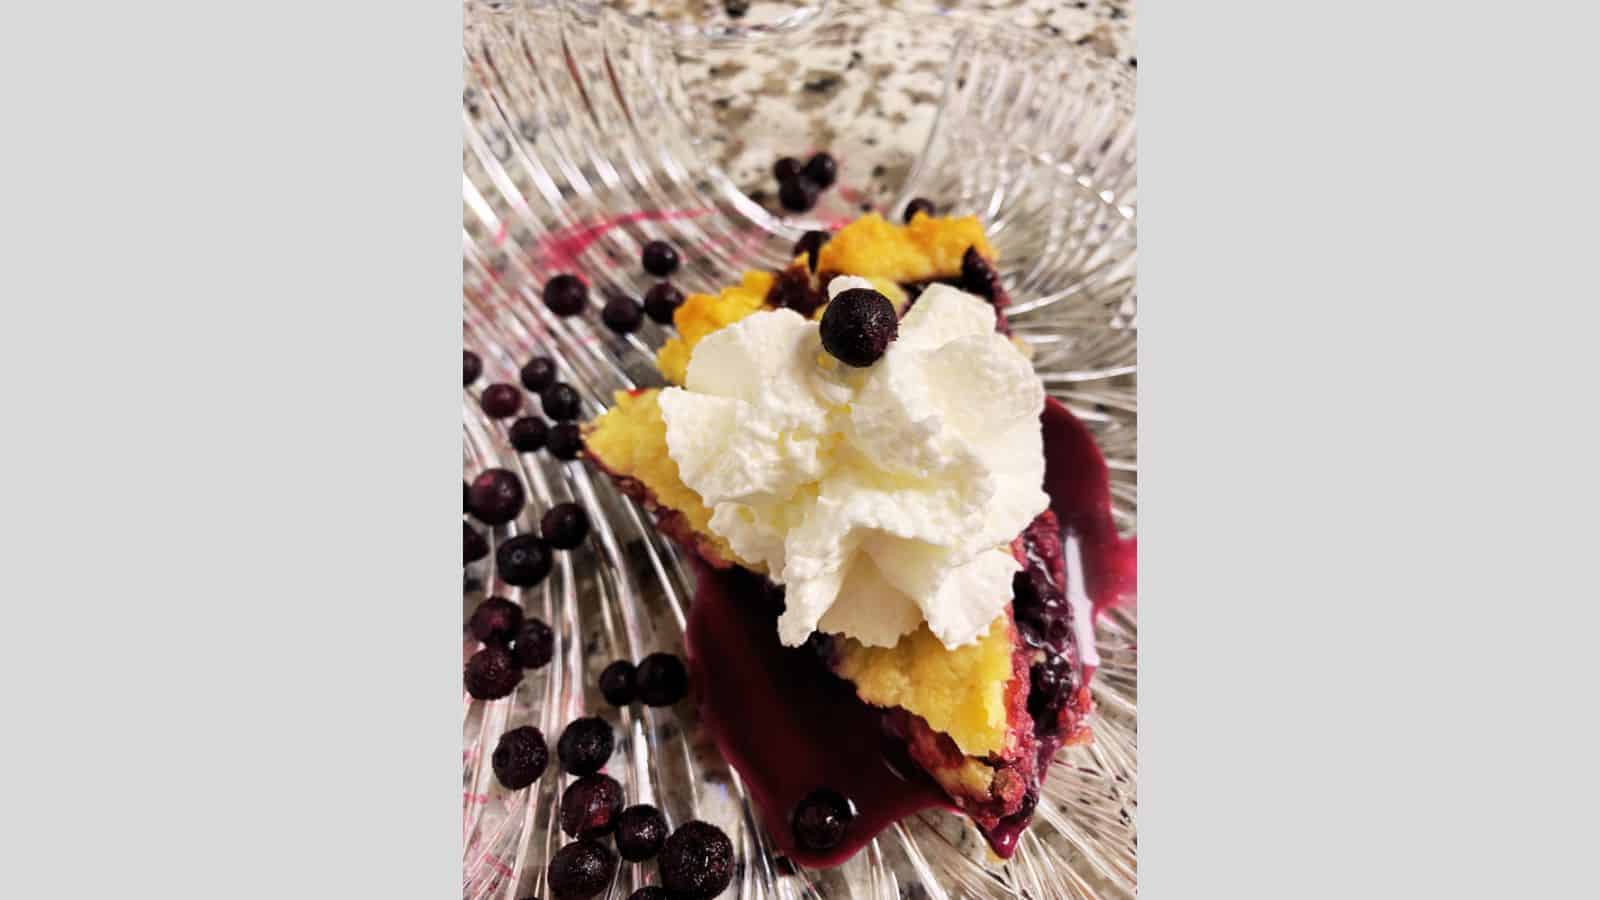 Slice of blueberry pie with whipped cream on glass plate.